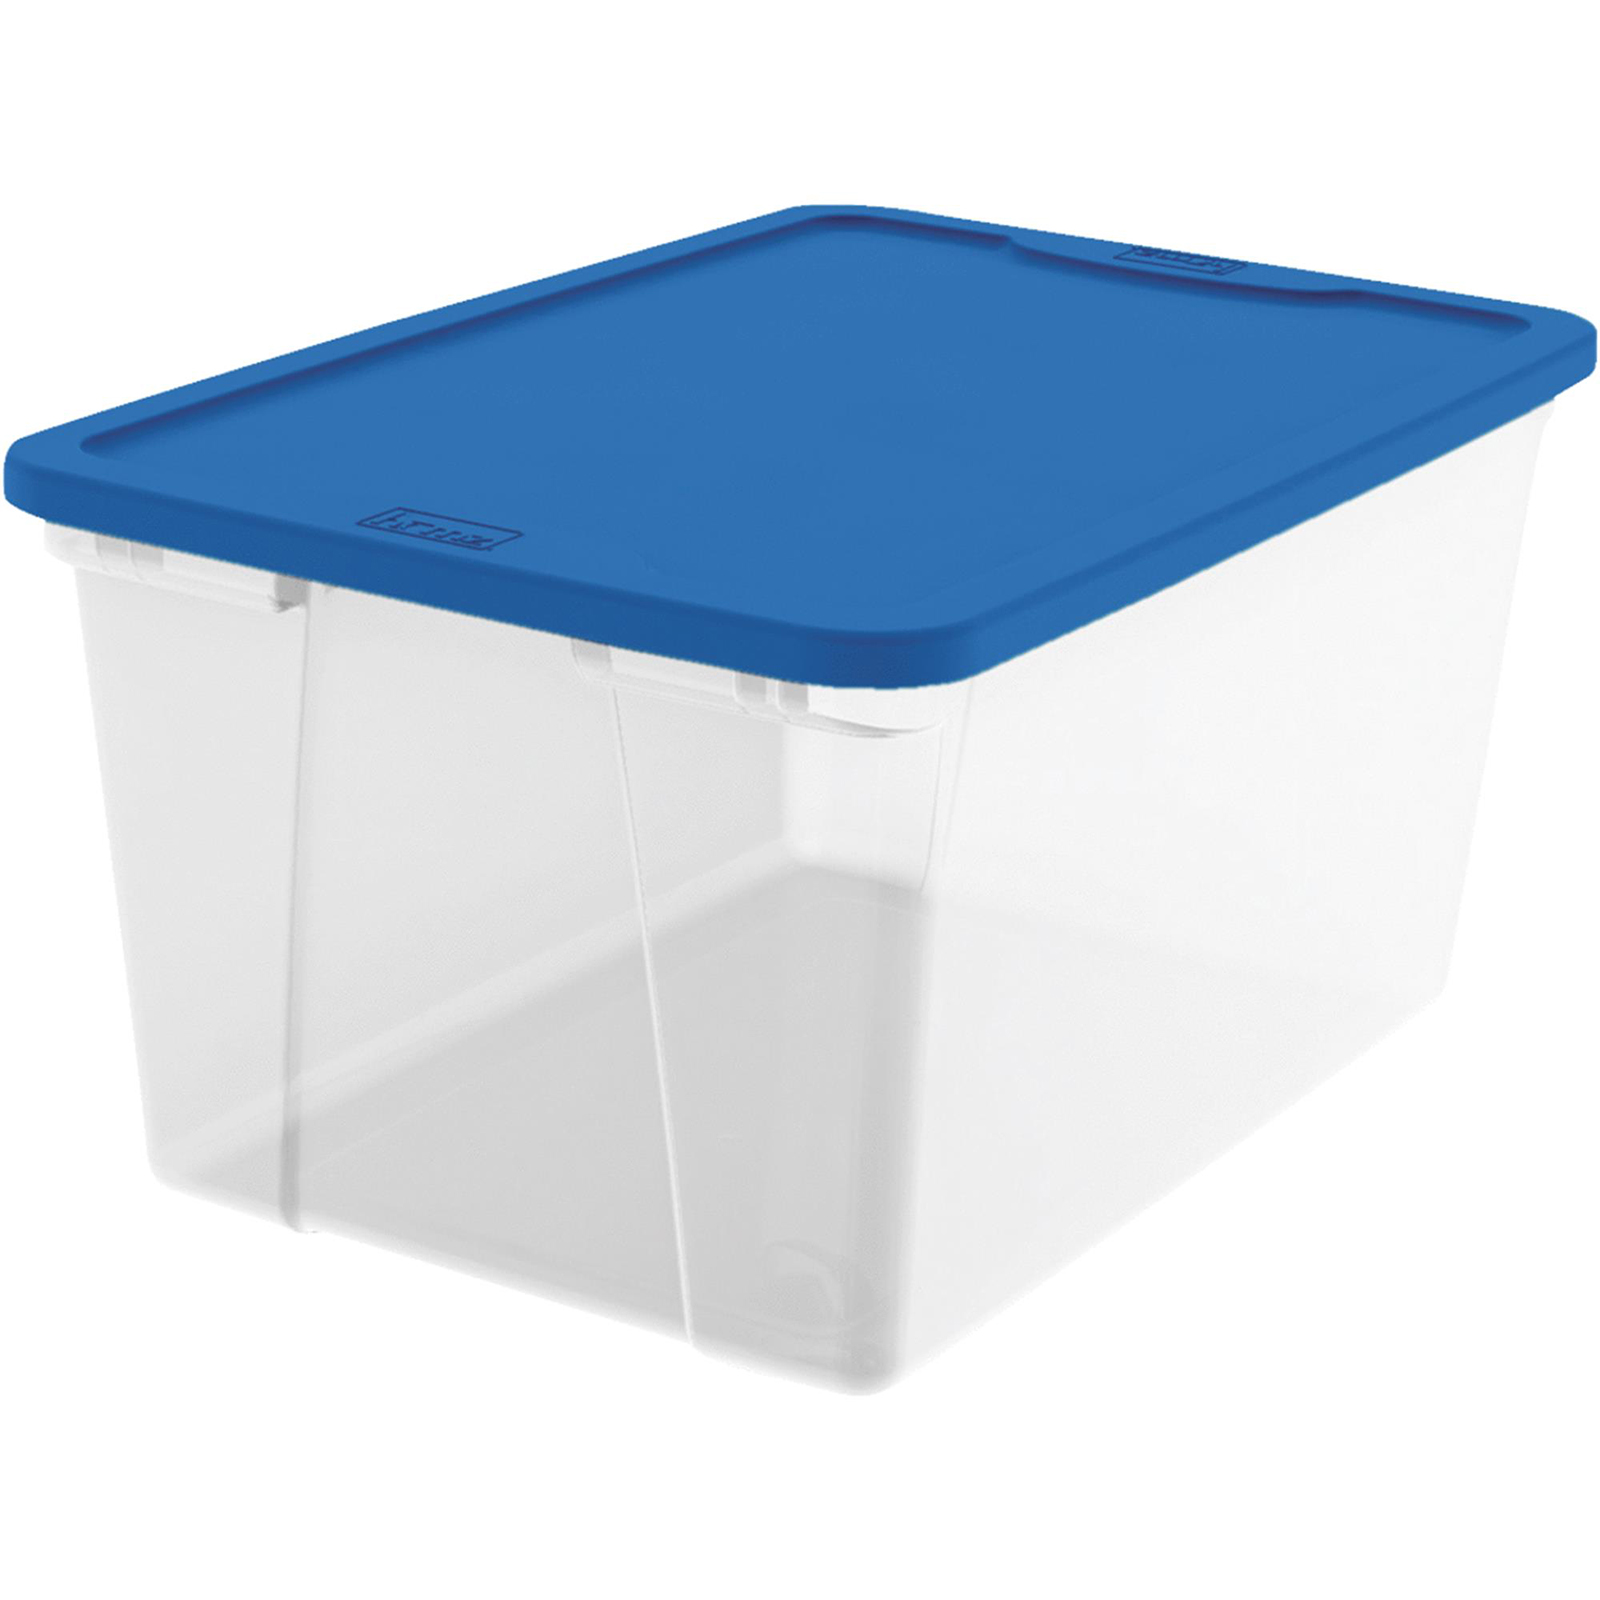 Homz Products 56qt. Storage Tote - Clear/Blue